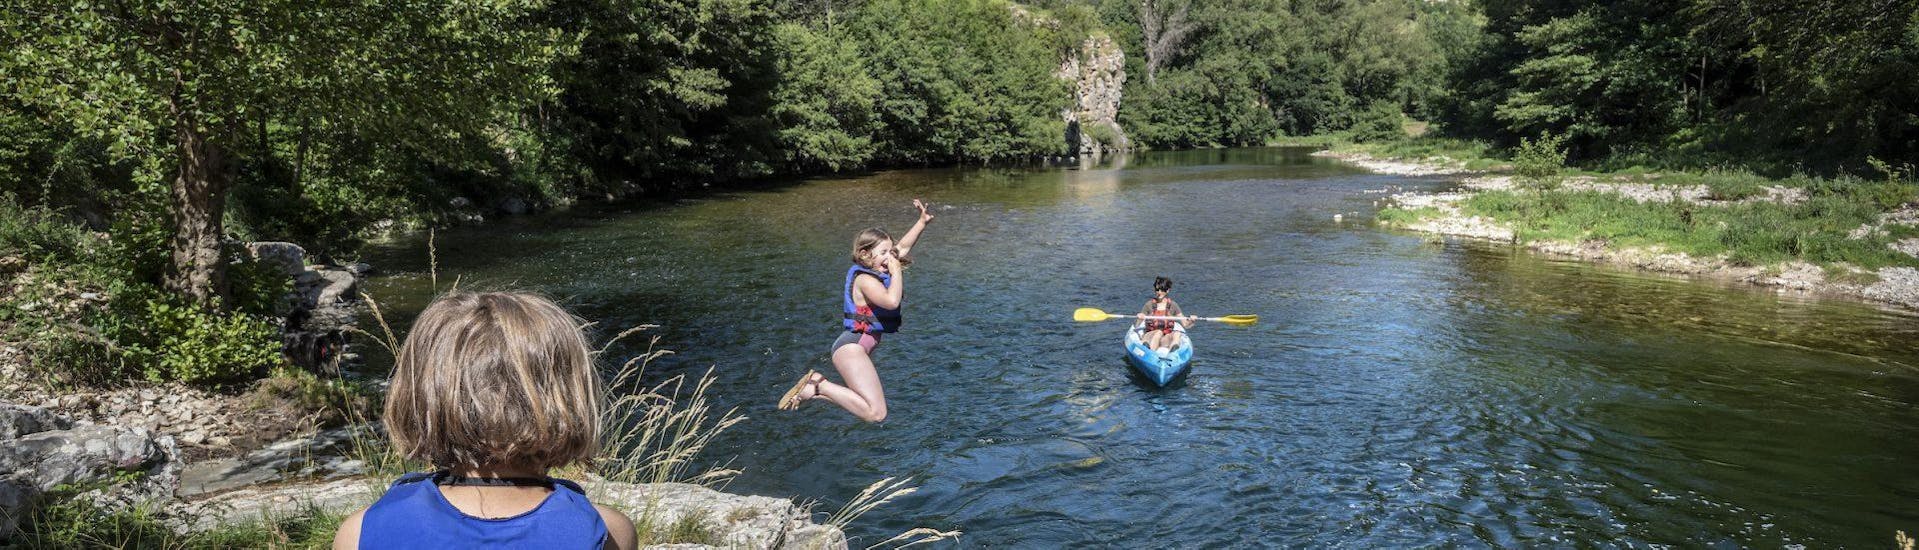 Adults and child having fun by jumping in the water during their kayak tour in Gorges du Tarn with Lo Canoë Gorges du Tarn.